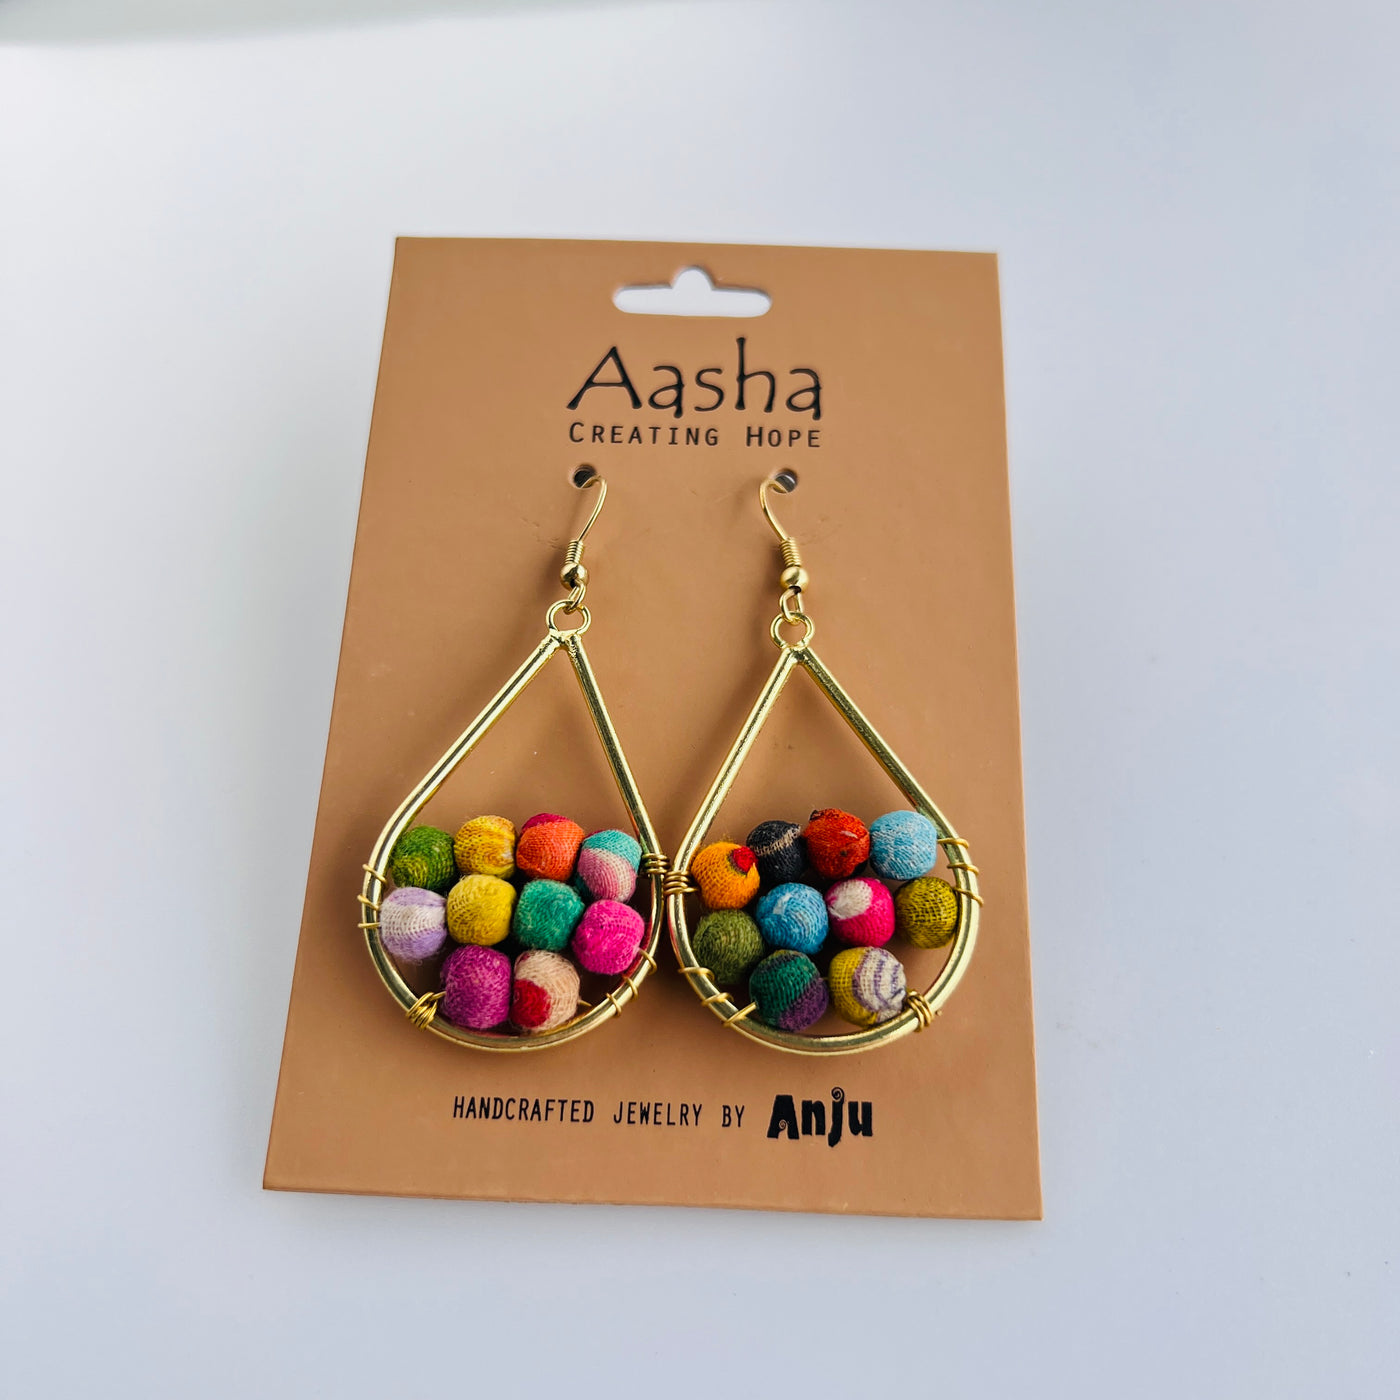 The Aasha Collection by Anju